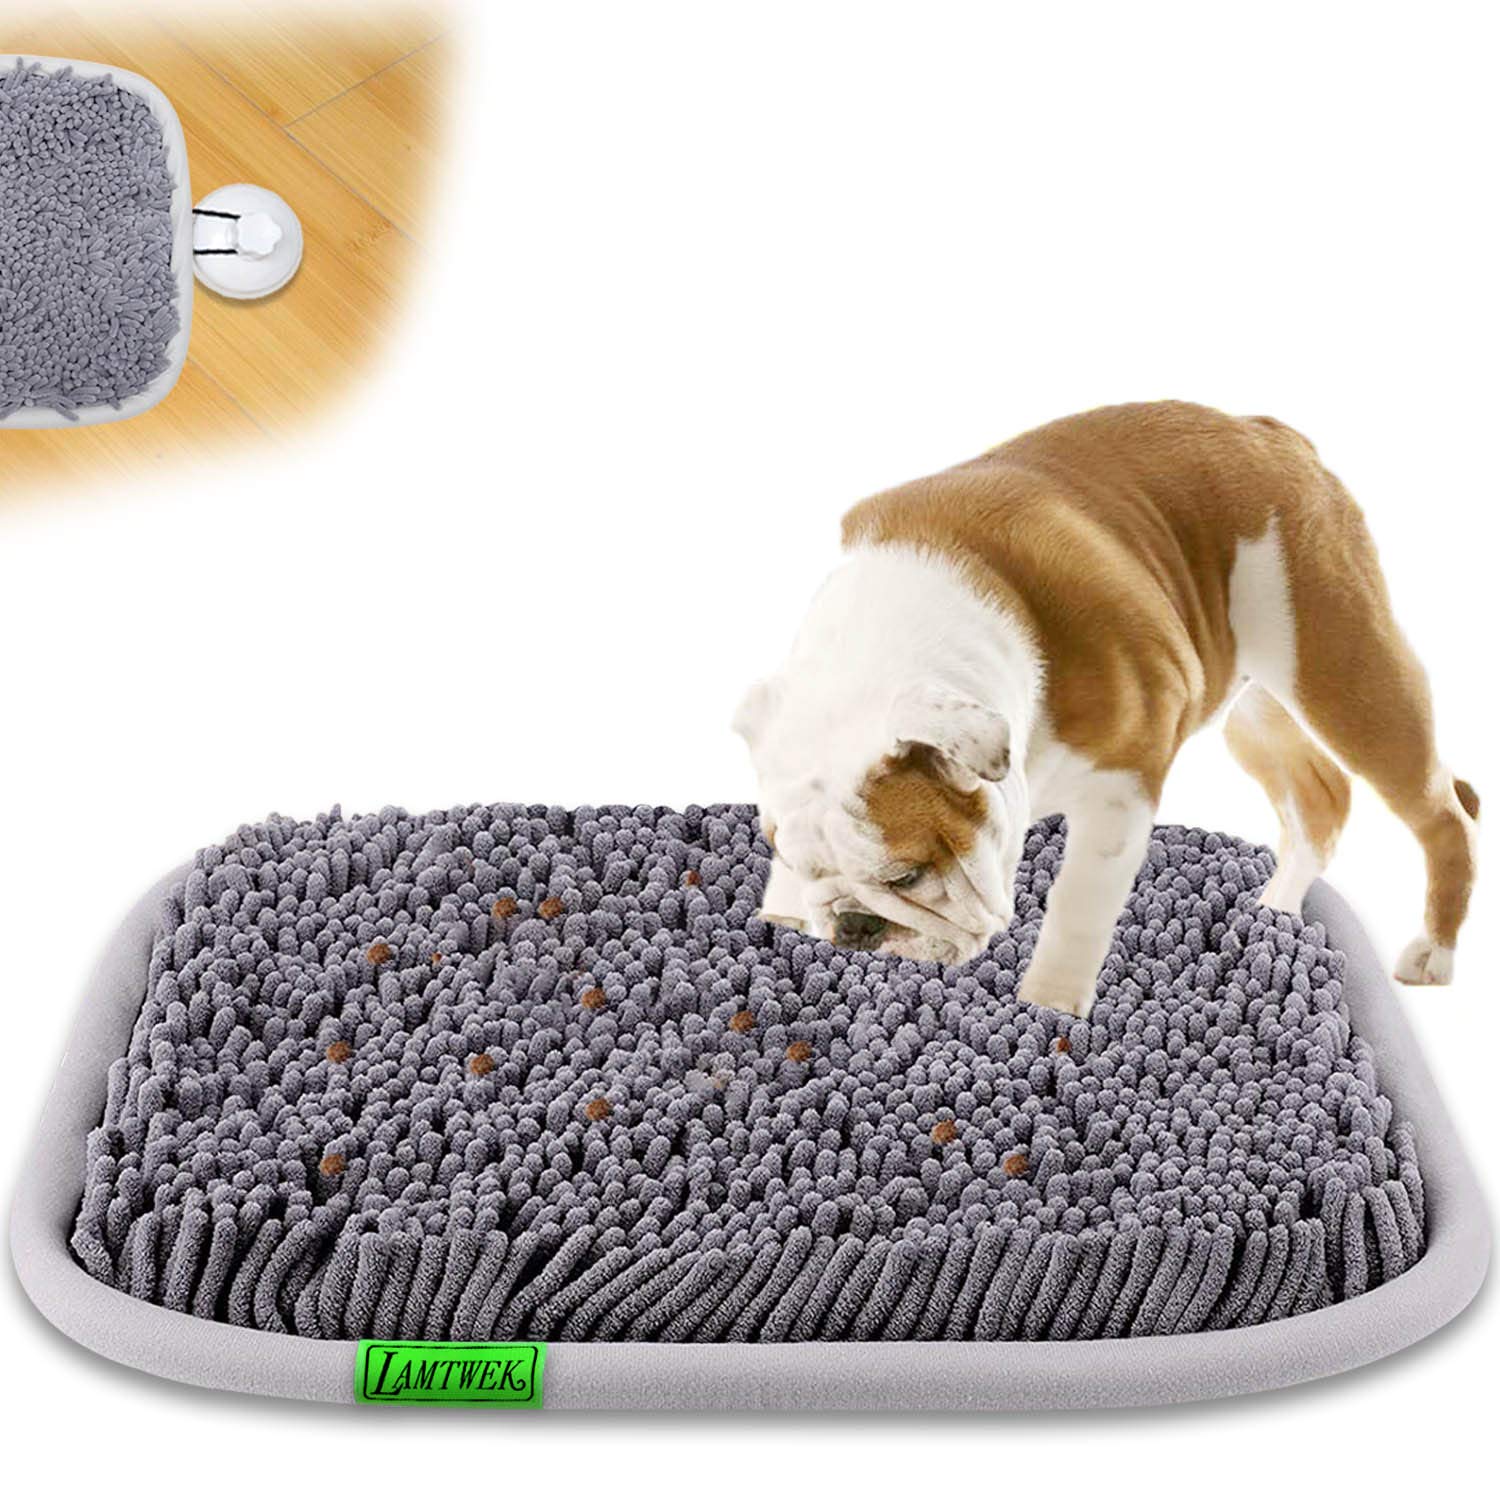 Snuffle Mat, Feeding Mat for Dogs, Interactive Dog Toys Encourages Natural